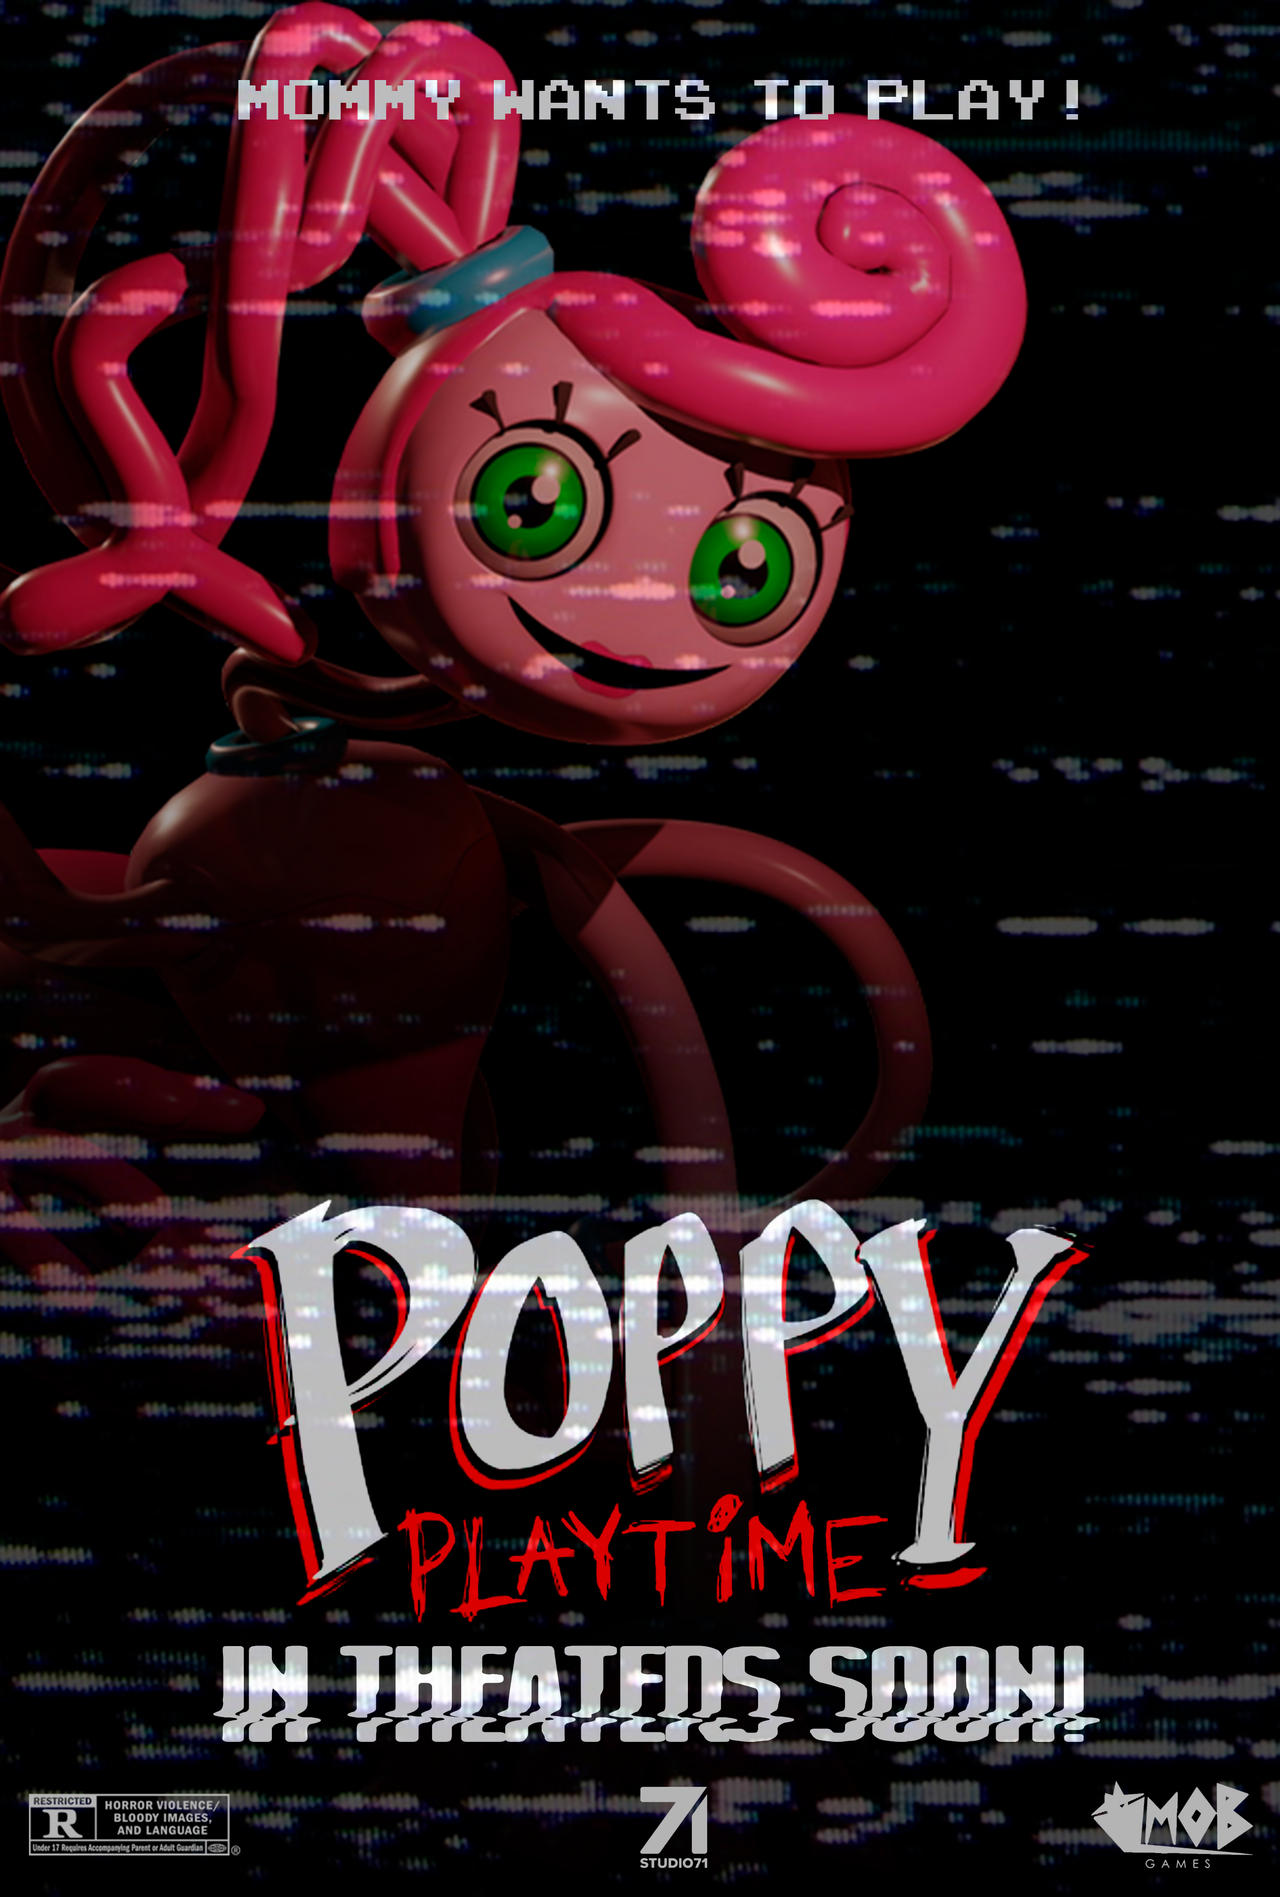 Mommy long legs Advertising Toy - Poppy Playtime Chapter 2 